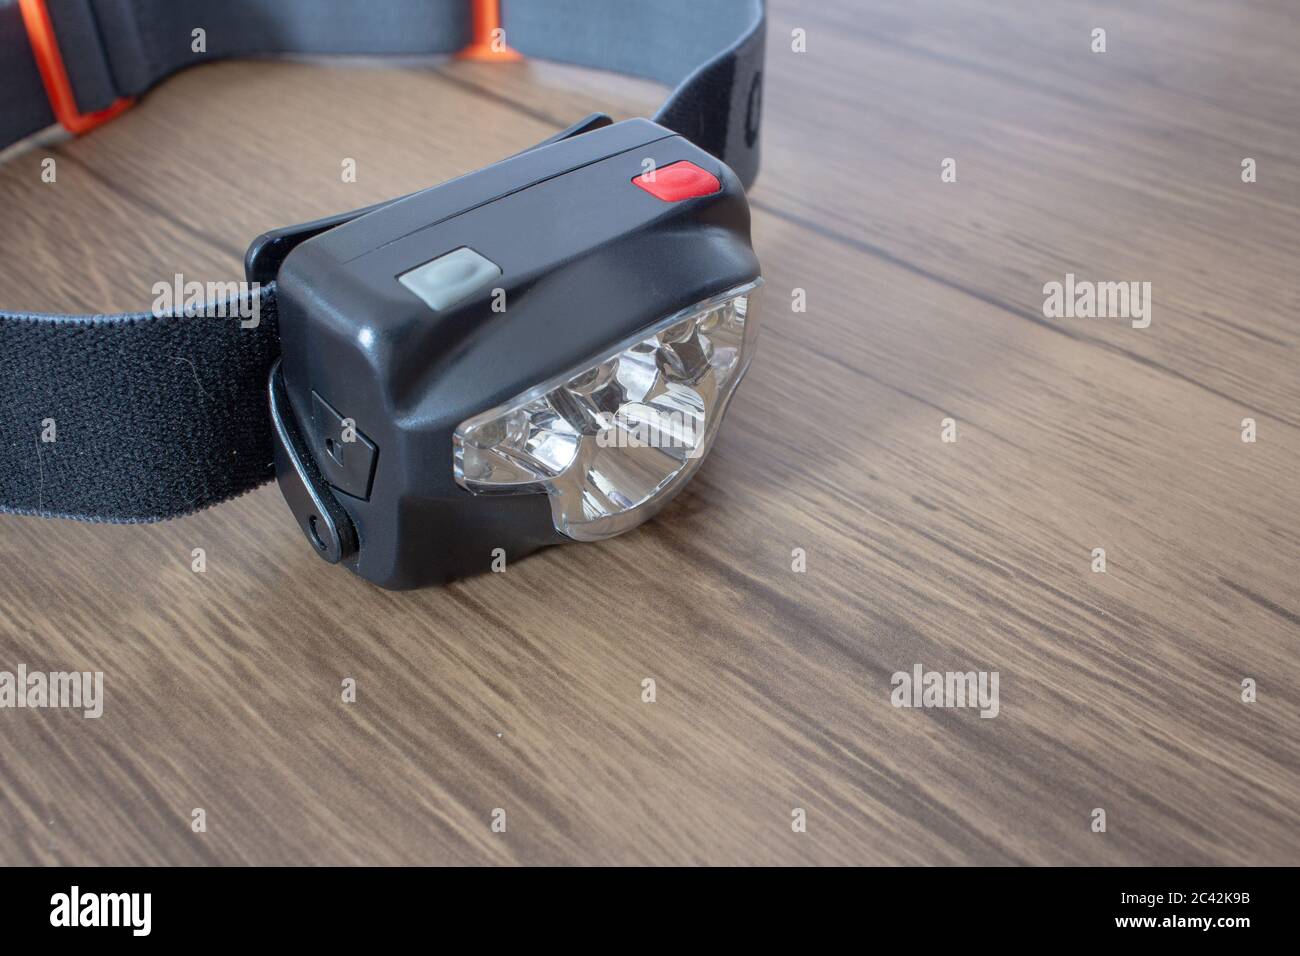 Black led headlamp turned off on a wooden table showing the elastic strap Stock Photo